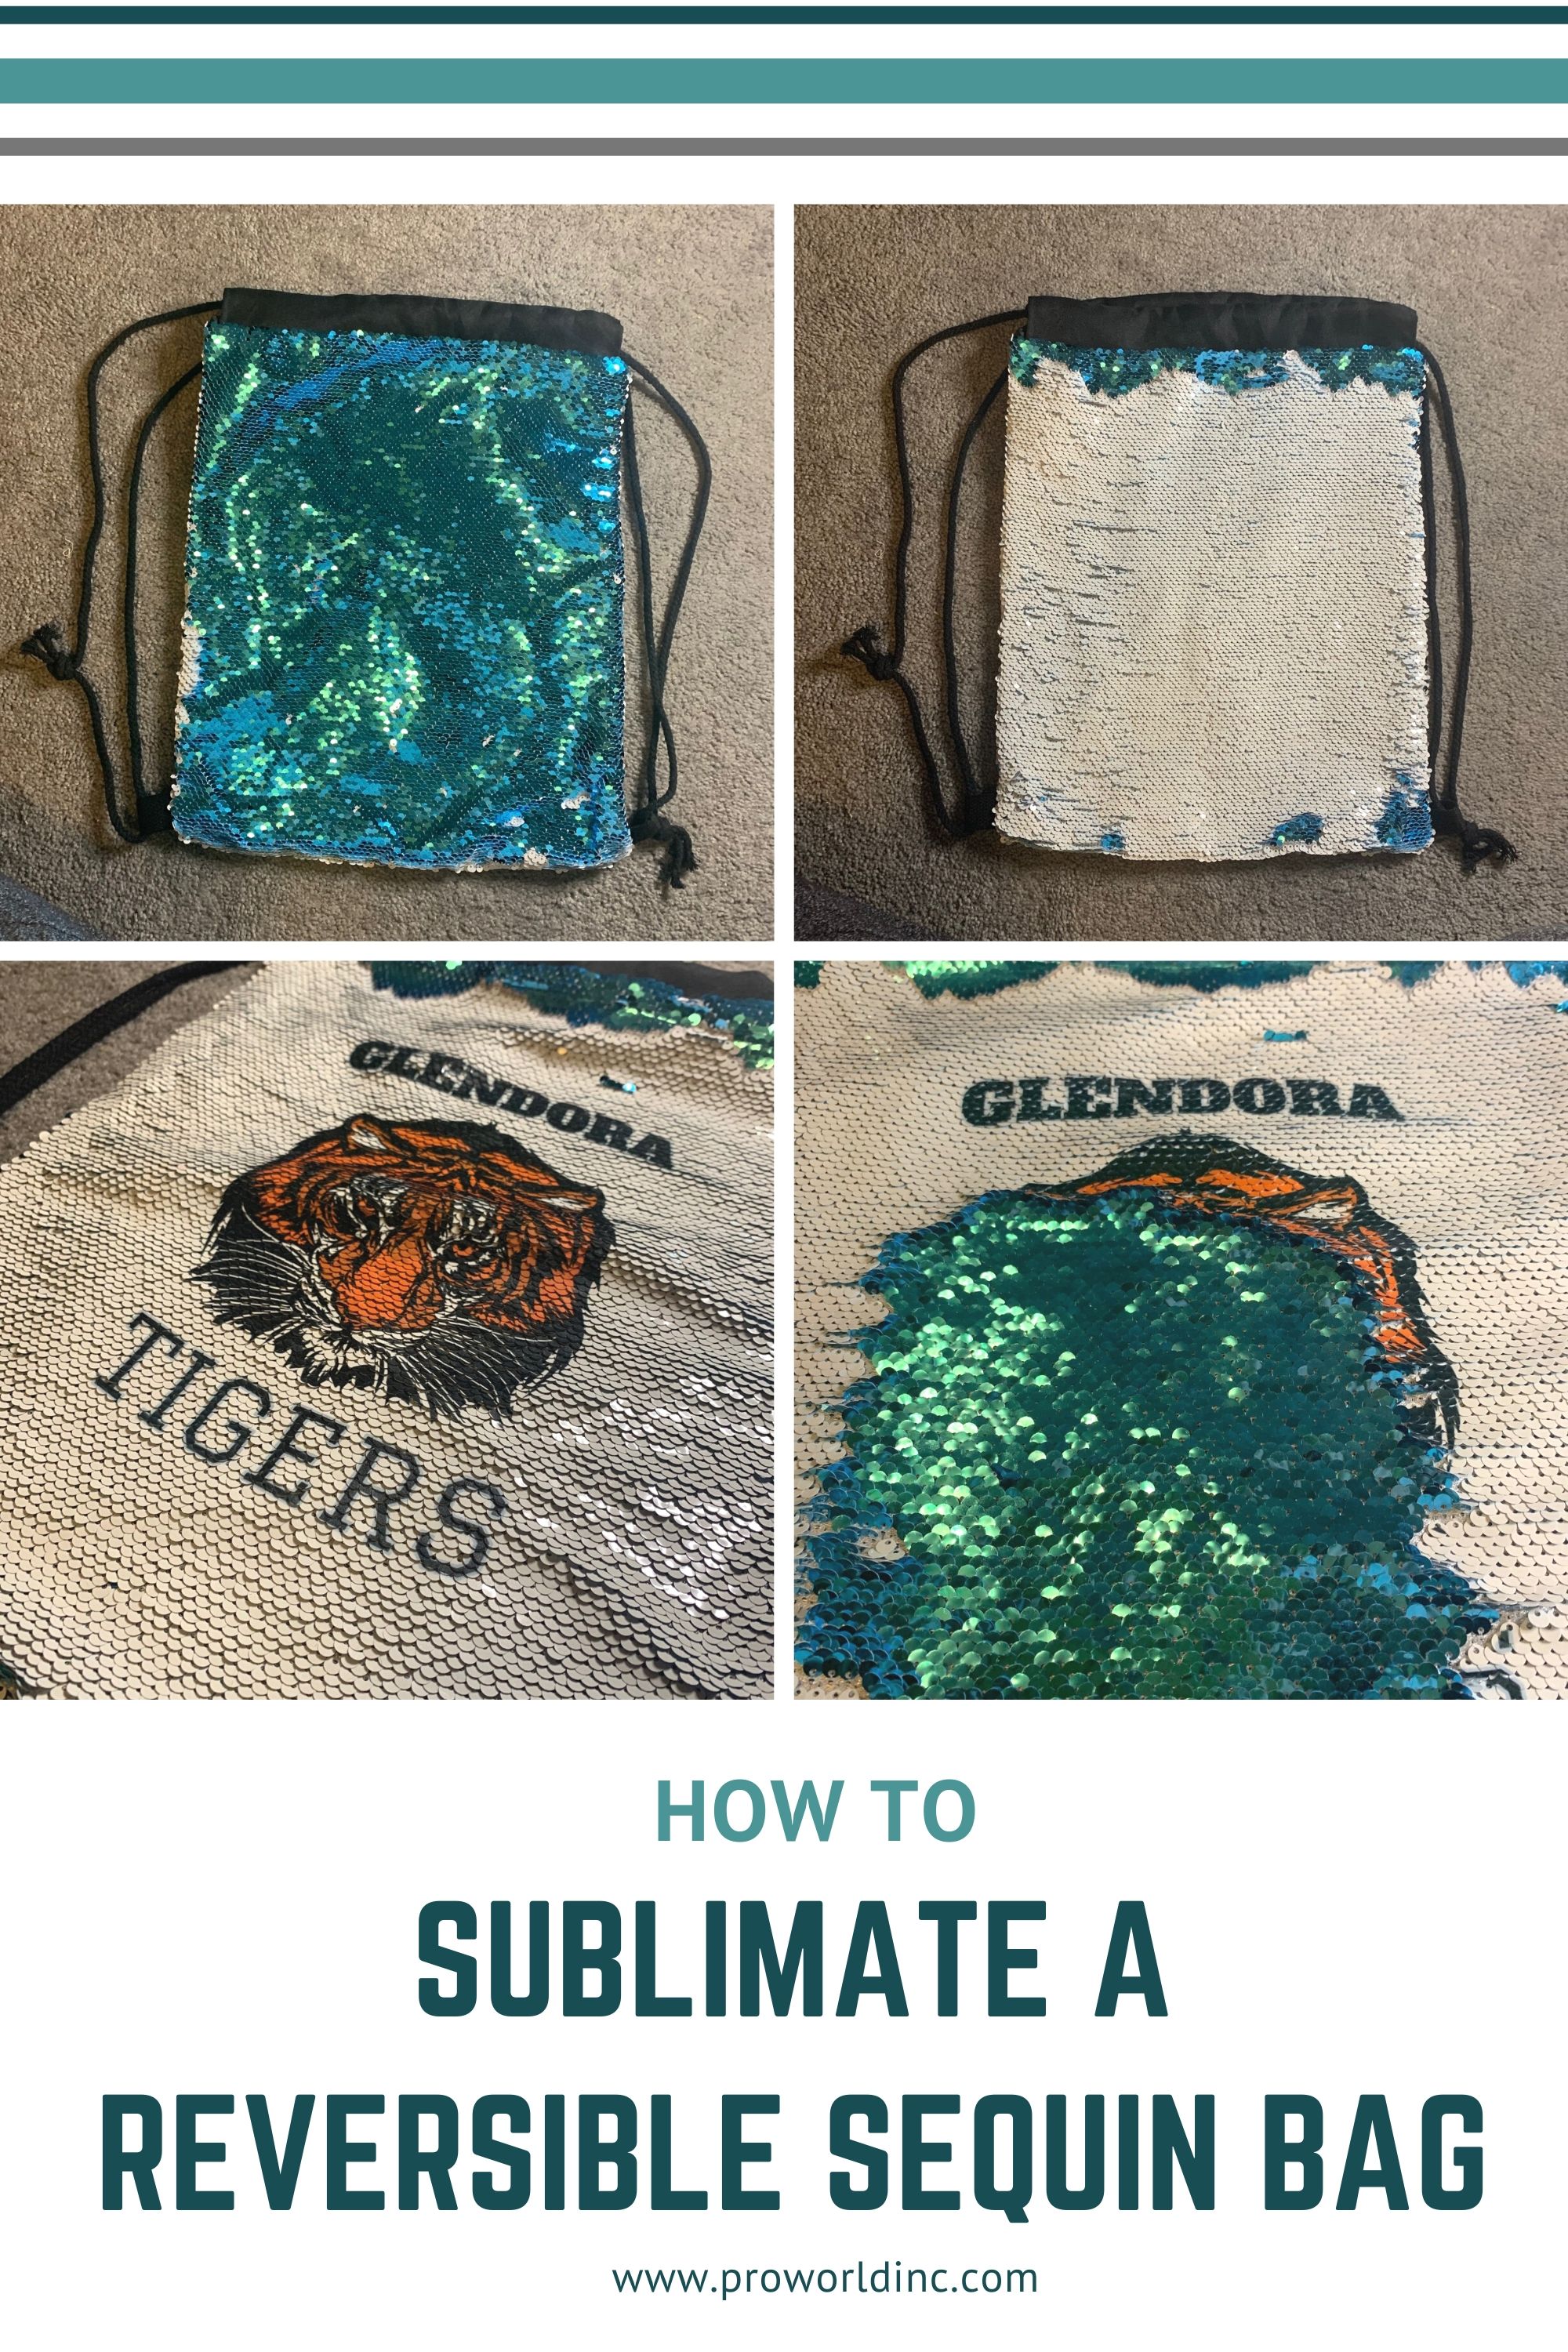 HOW TO SUBLIMATE A REVERSIBLE SEQUIN BAG